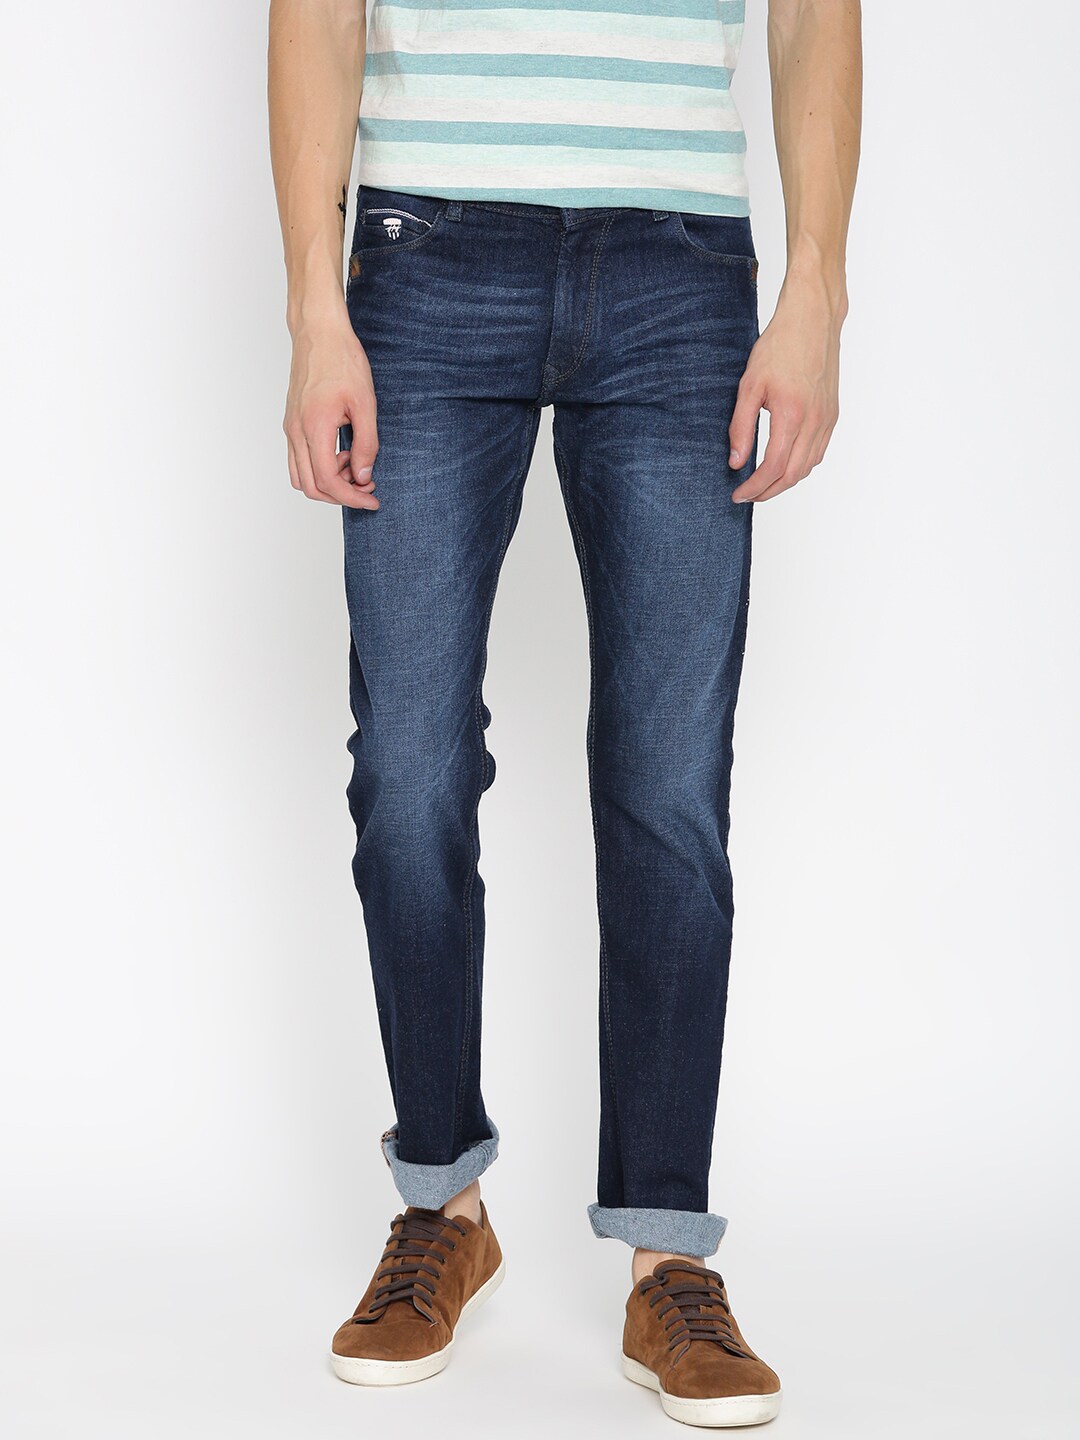 Buy Charcoal Grey Jeans for Men by JOHN PLAYERS JEANS Online | Ajio.com